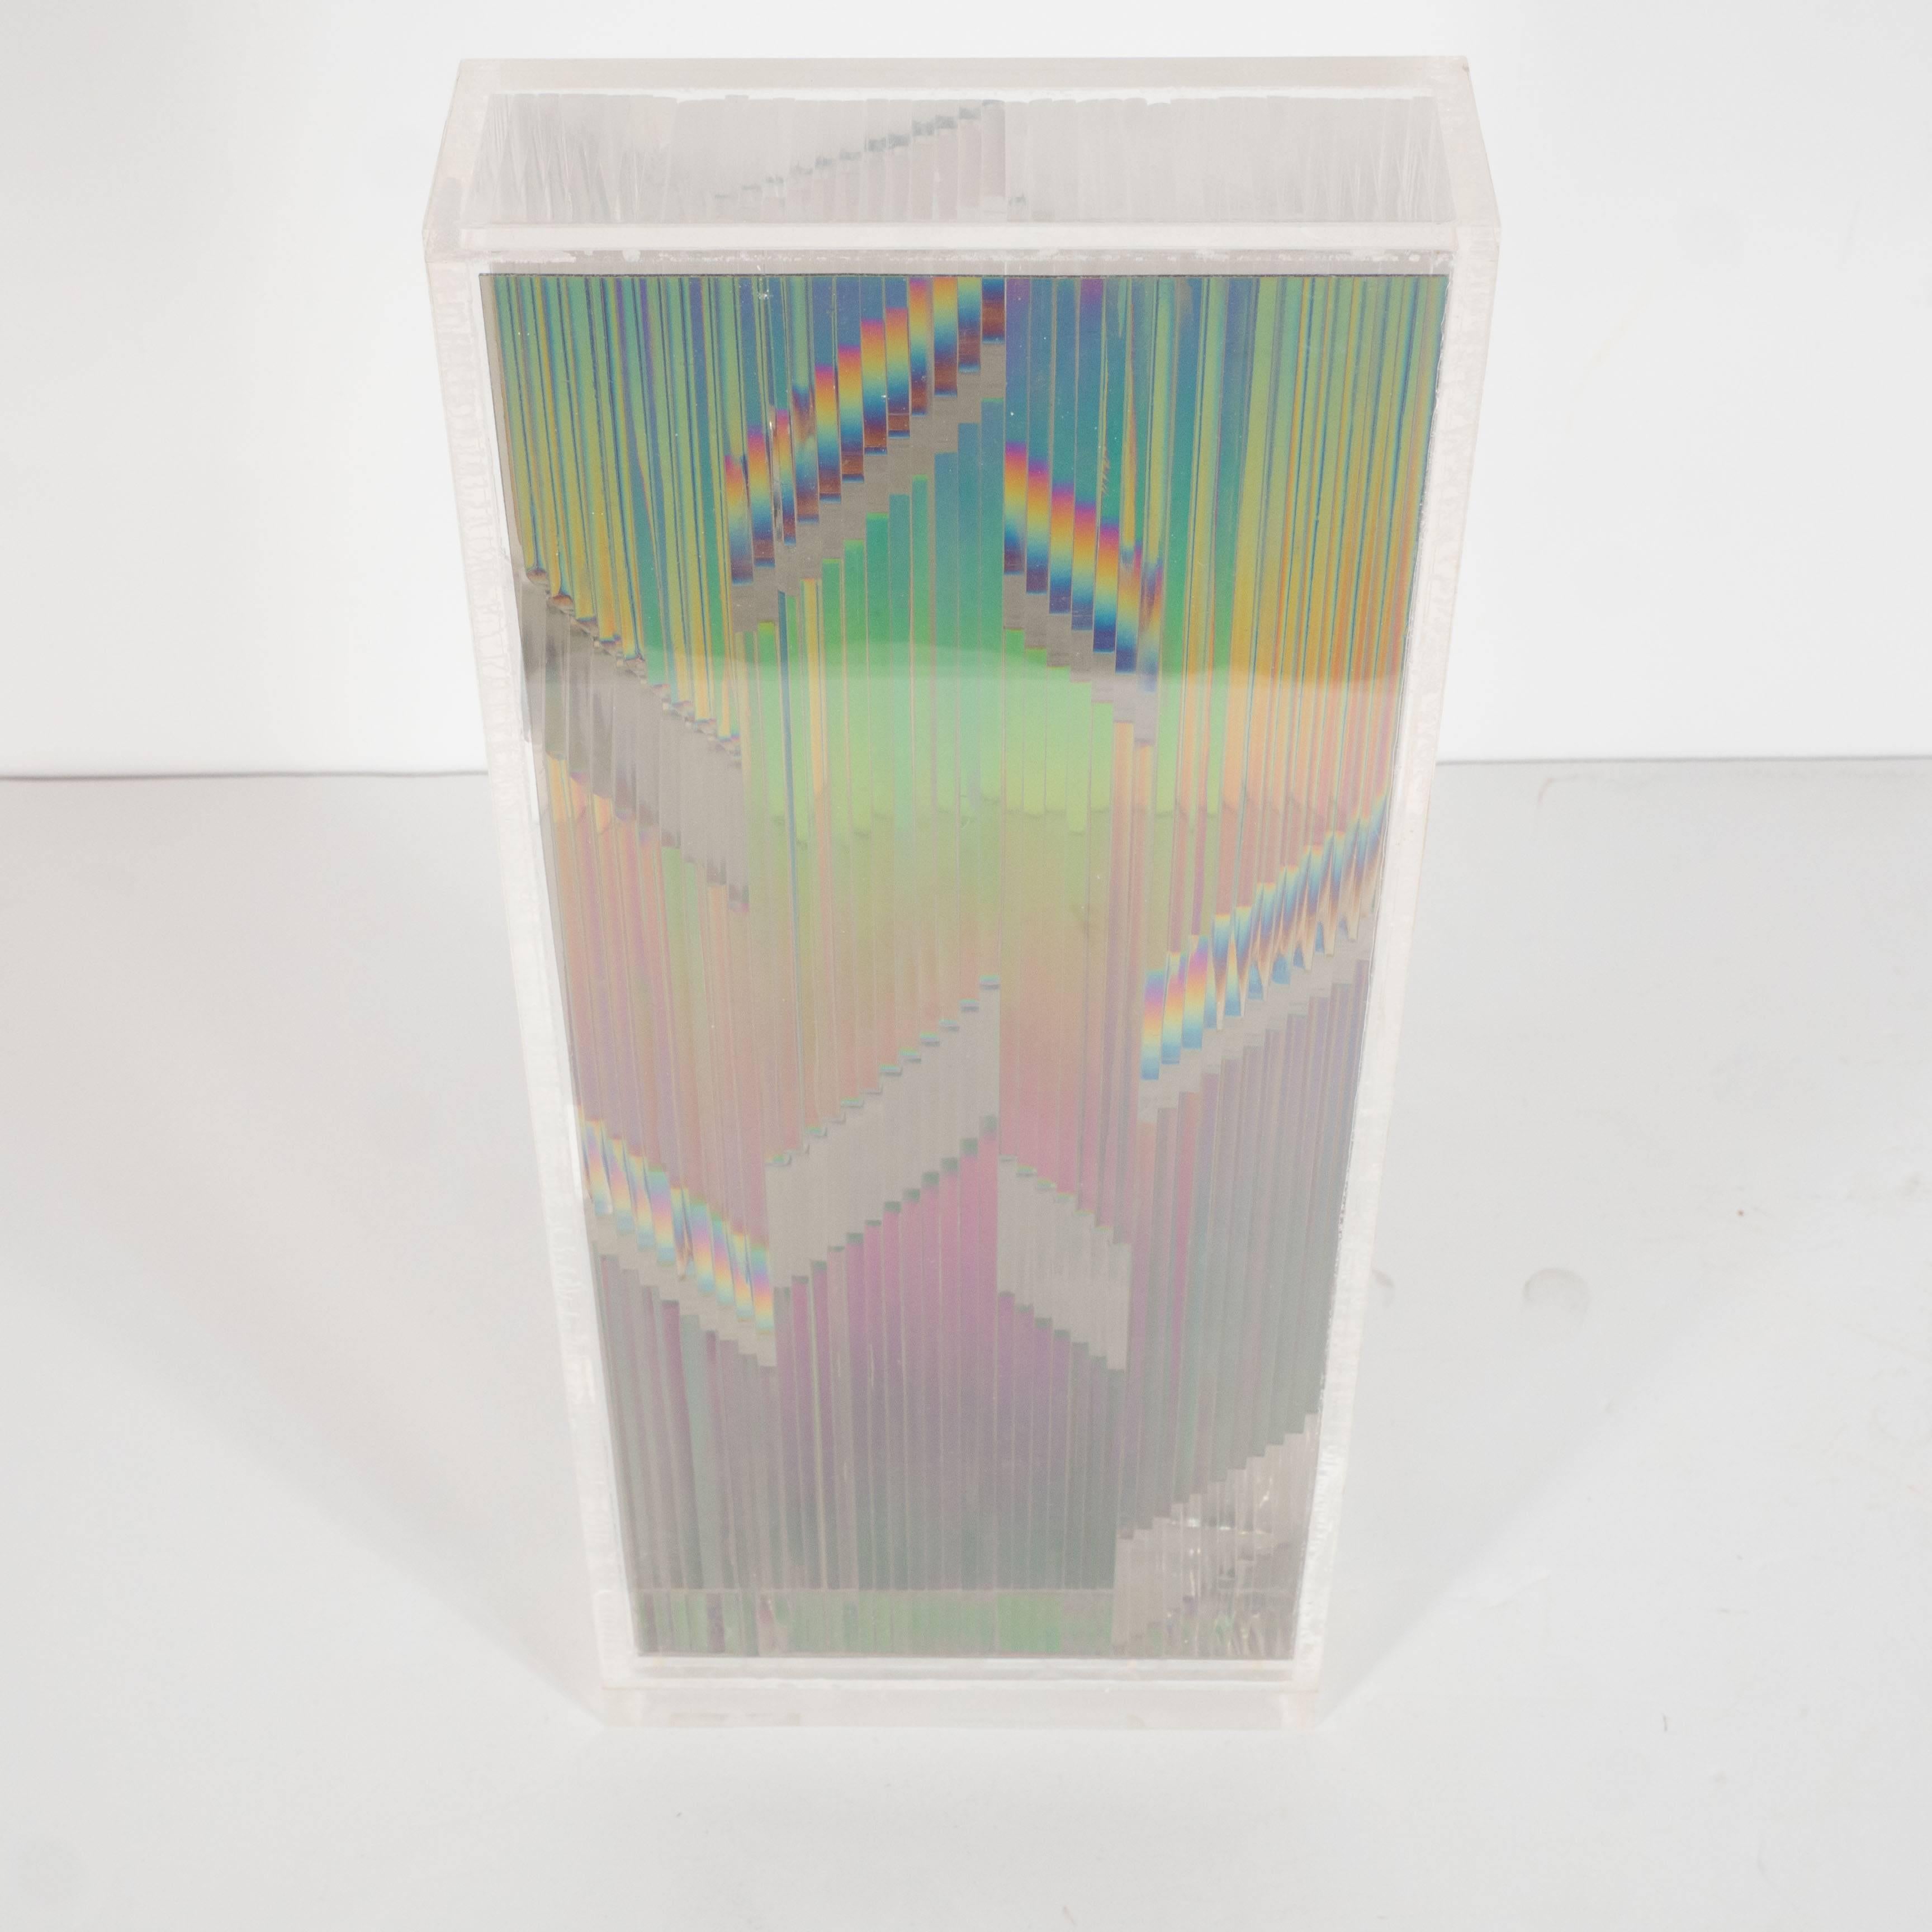 This Mid-Century Modernist sculpture features an Optical art design all executed out of stacked Lucite. It is titled Tower 1 and dated 1968 and inscribed with the signature Rory Mcewen. This would be wonderful in a bookcase or as a stand alone art